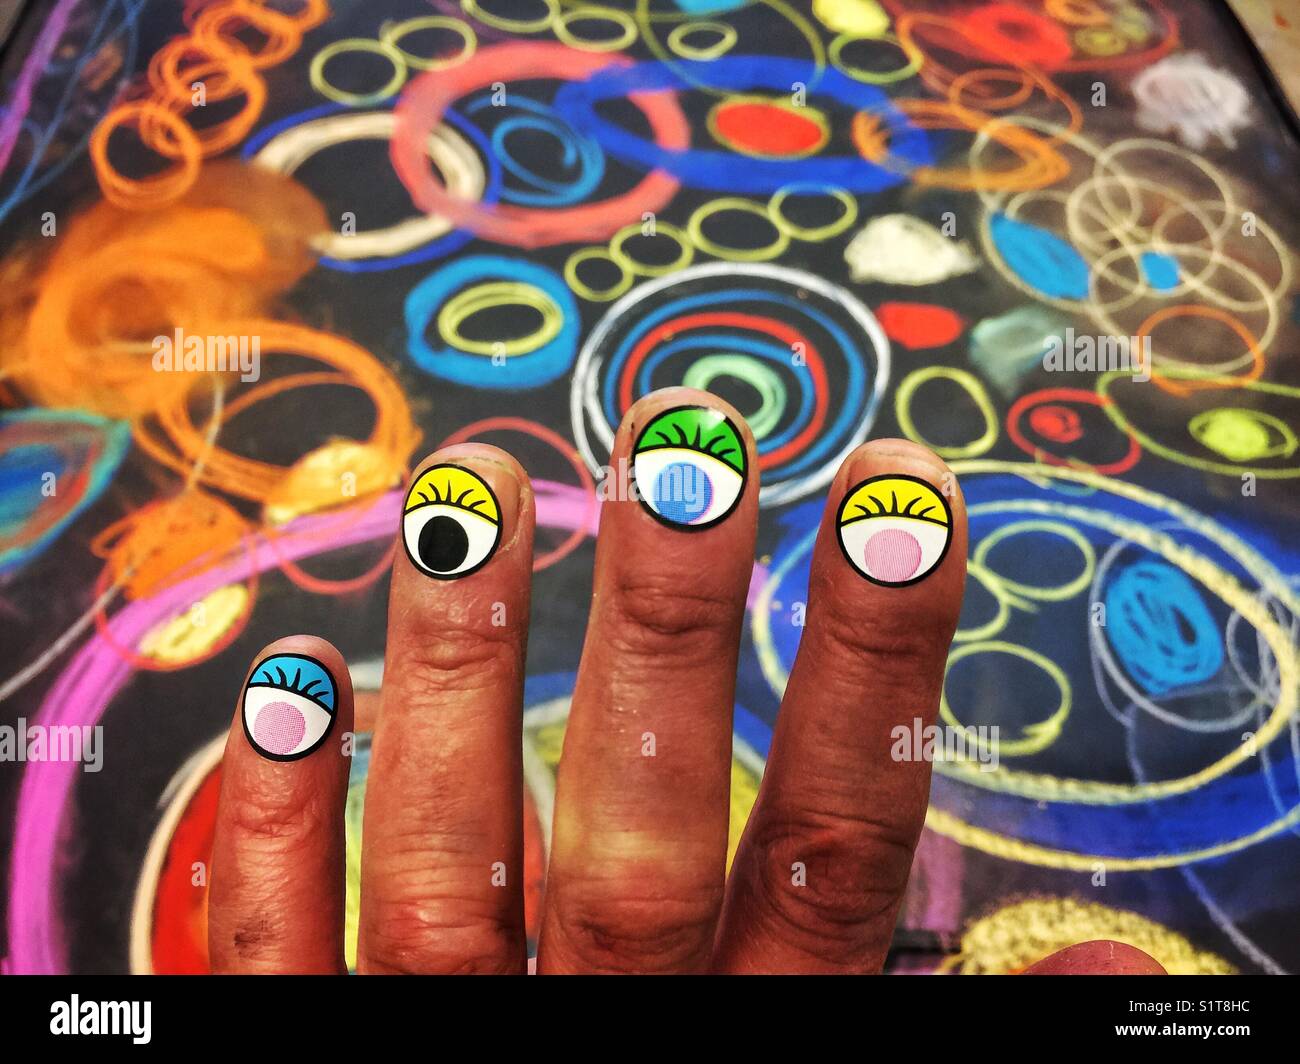 Dark skinned child's fingers with eyes stickers on them in front of bright chalk artwork Stock Photo